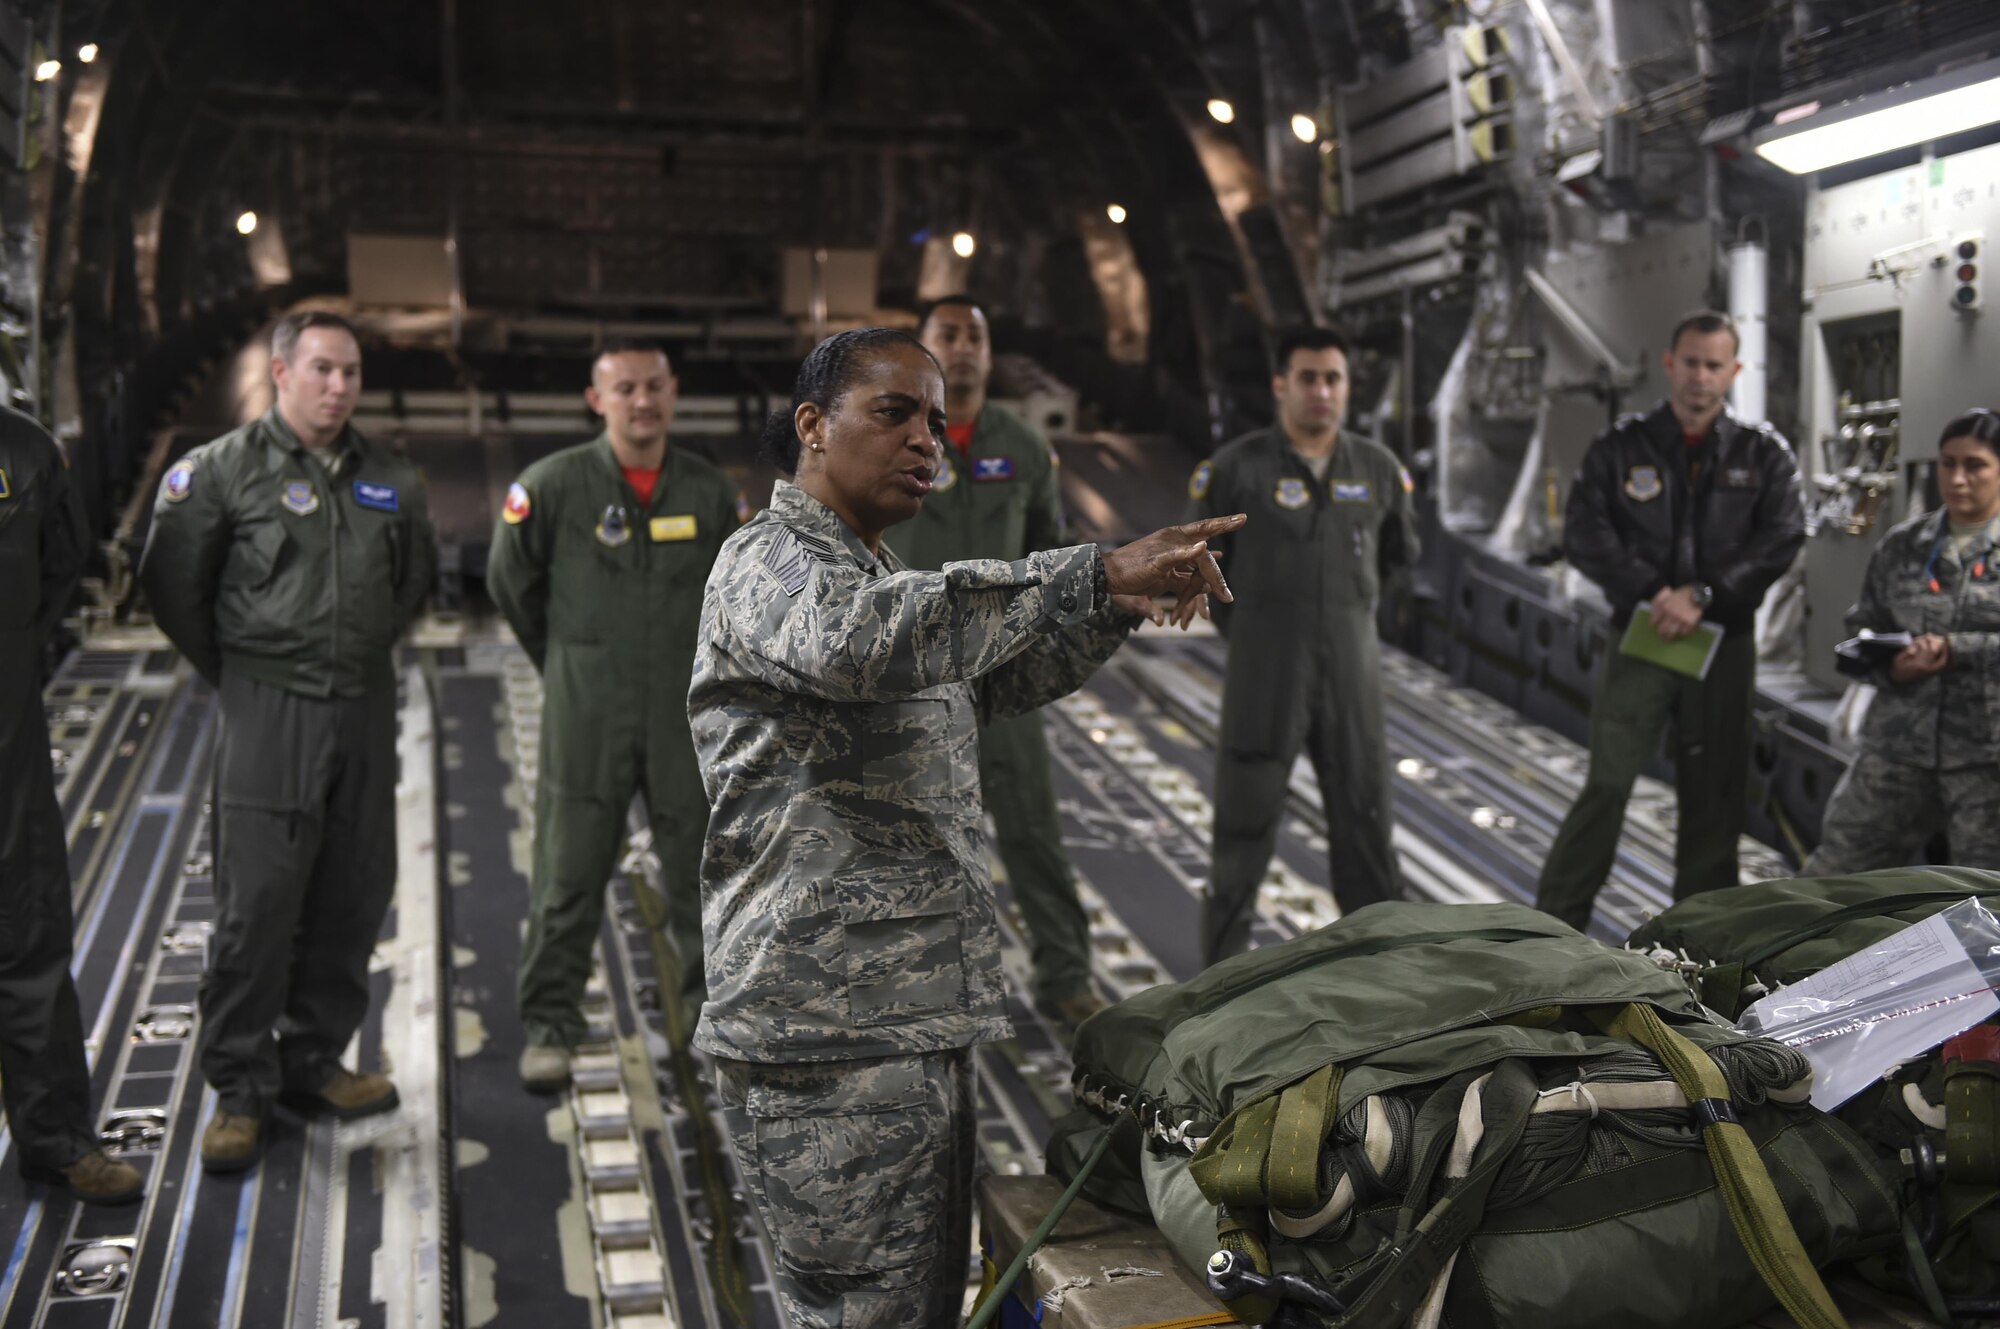 Chief Master Sgt. Shelina Frey, Air Mobility Command command chief, explains to aircrew members of the 15th and 16th Airlift Squadron about how important their feedback is to help the AMC mission while aboard a C-17 Globemaster III on the flightline at Joint Base Charleston, S.C., Nov. 17, 2017.